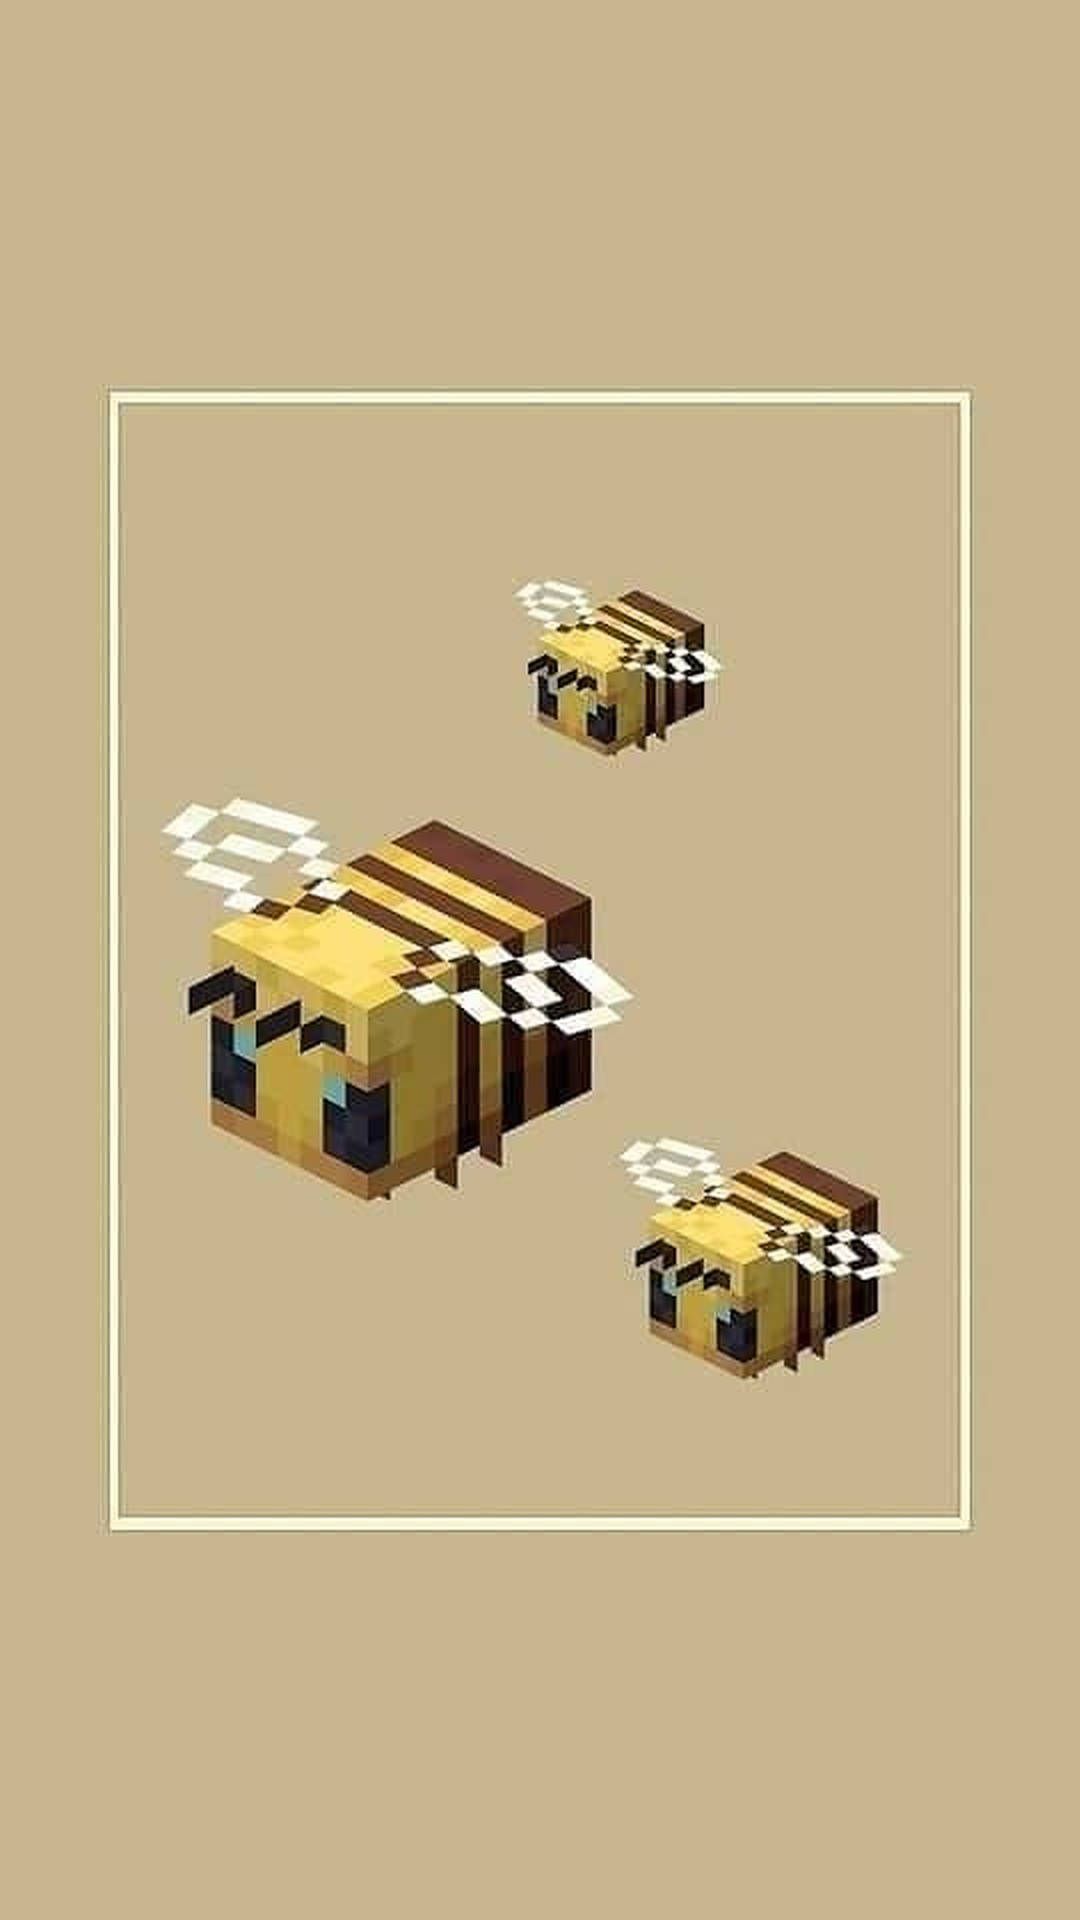 Download Three Hovering Minecraft Bees Wallpaper